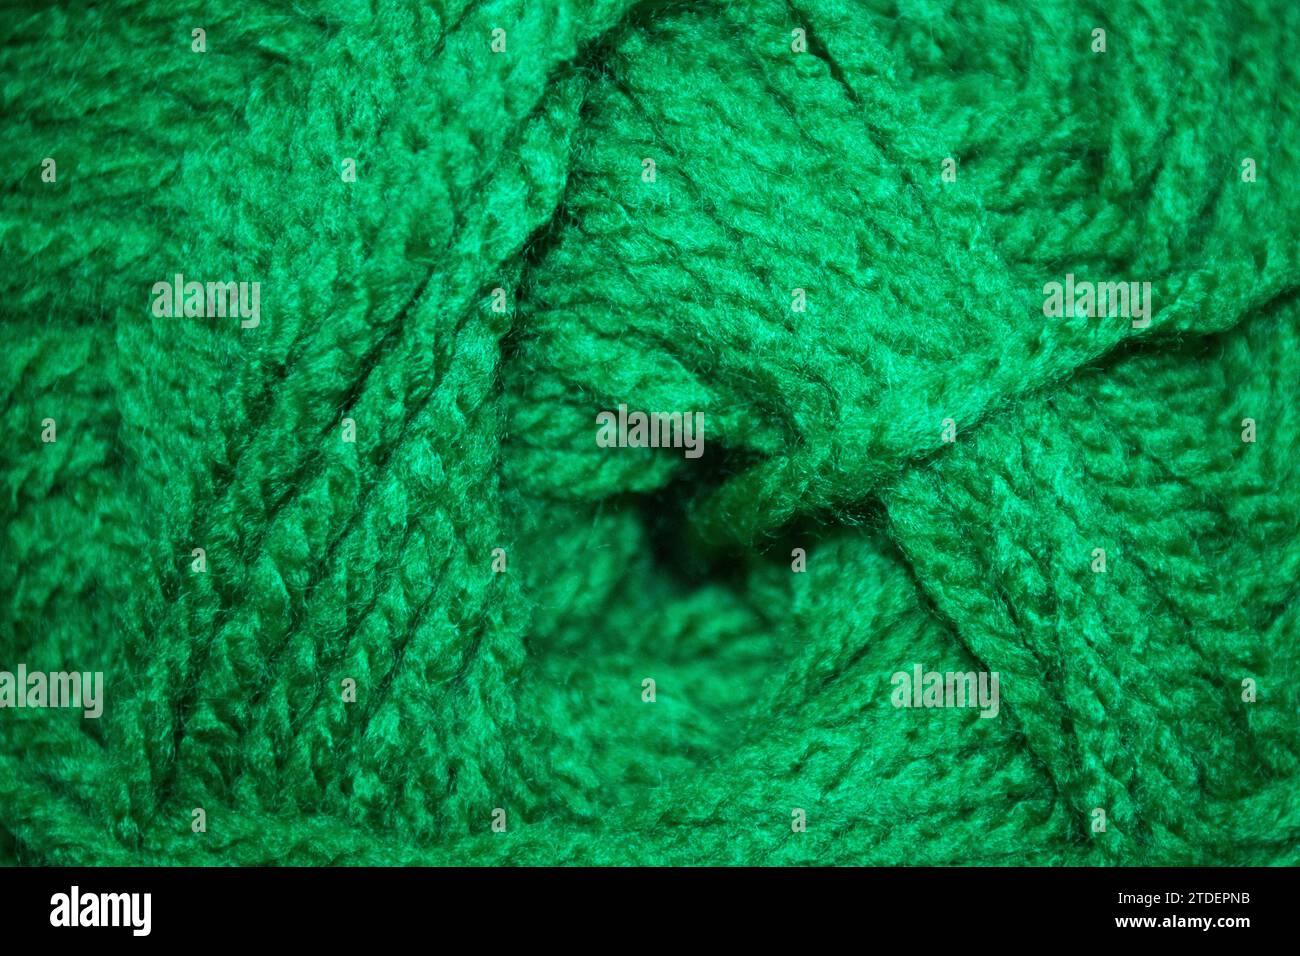 Ball of green wool. Texture or background. Stock Photo